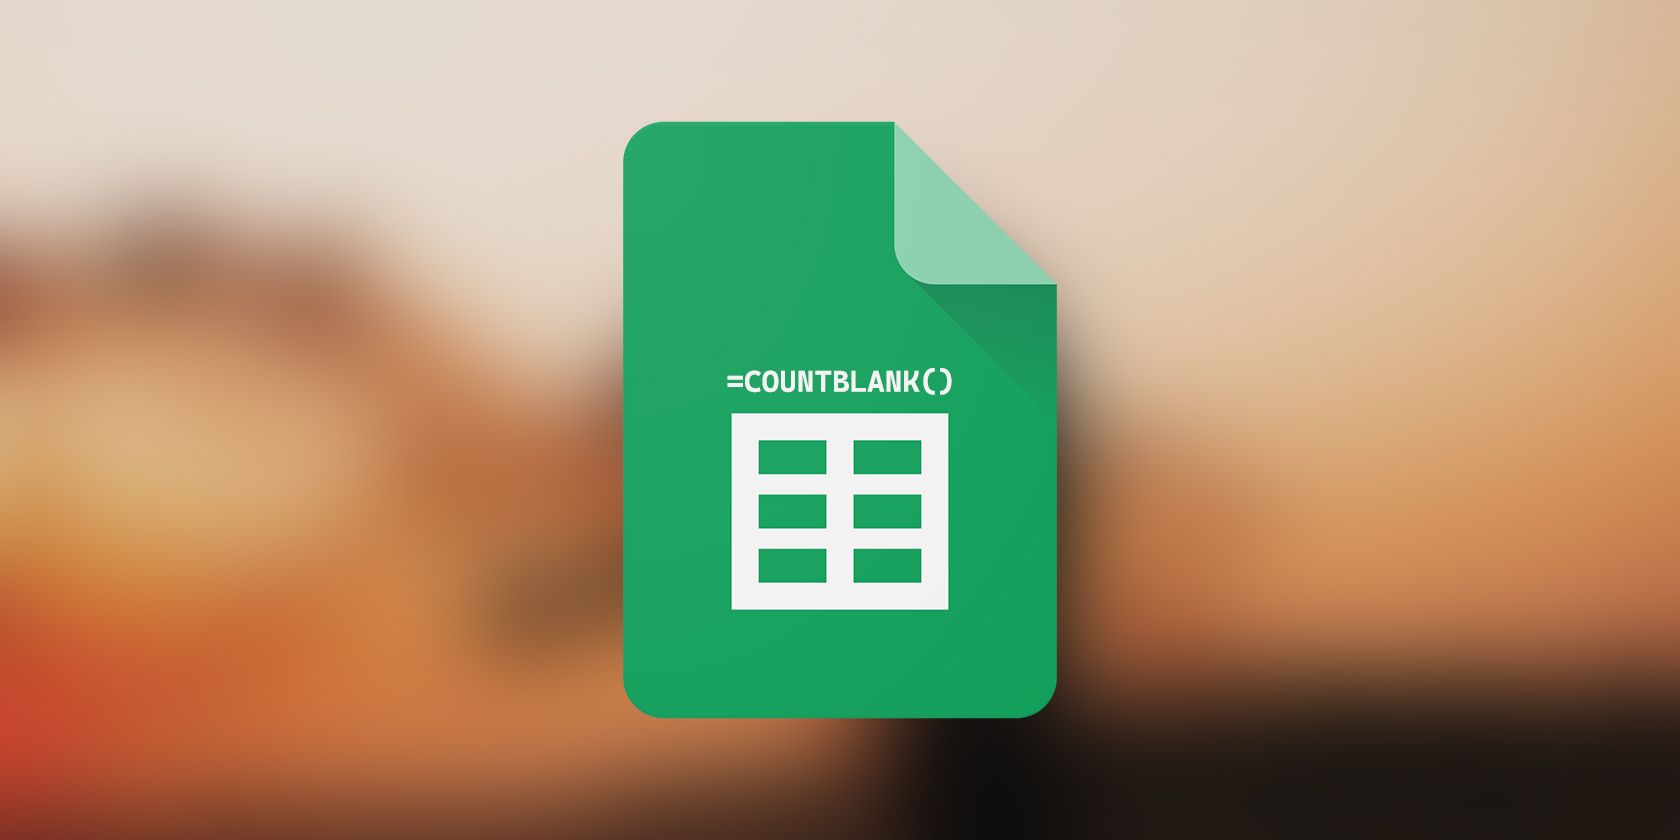 Google Sheets logo with COUNTBLANK engraved on it.